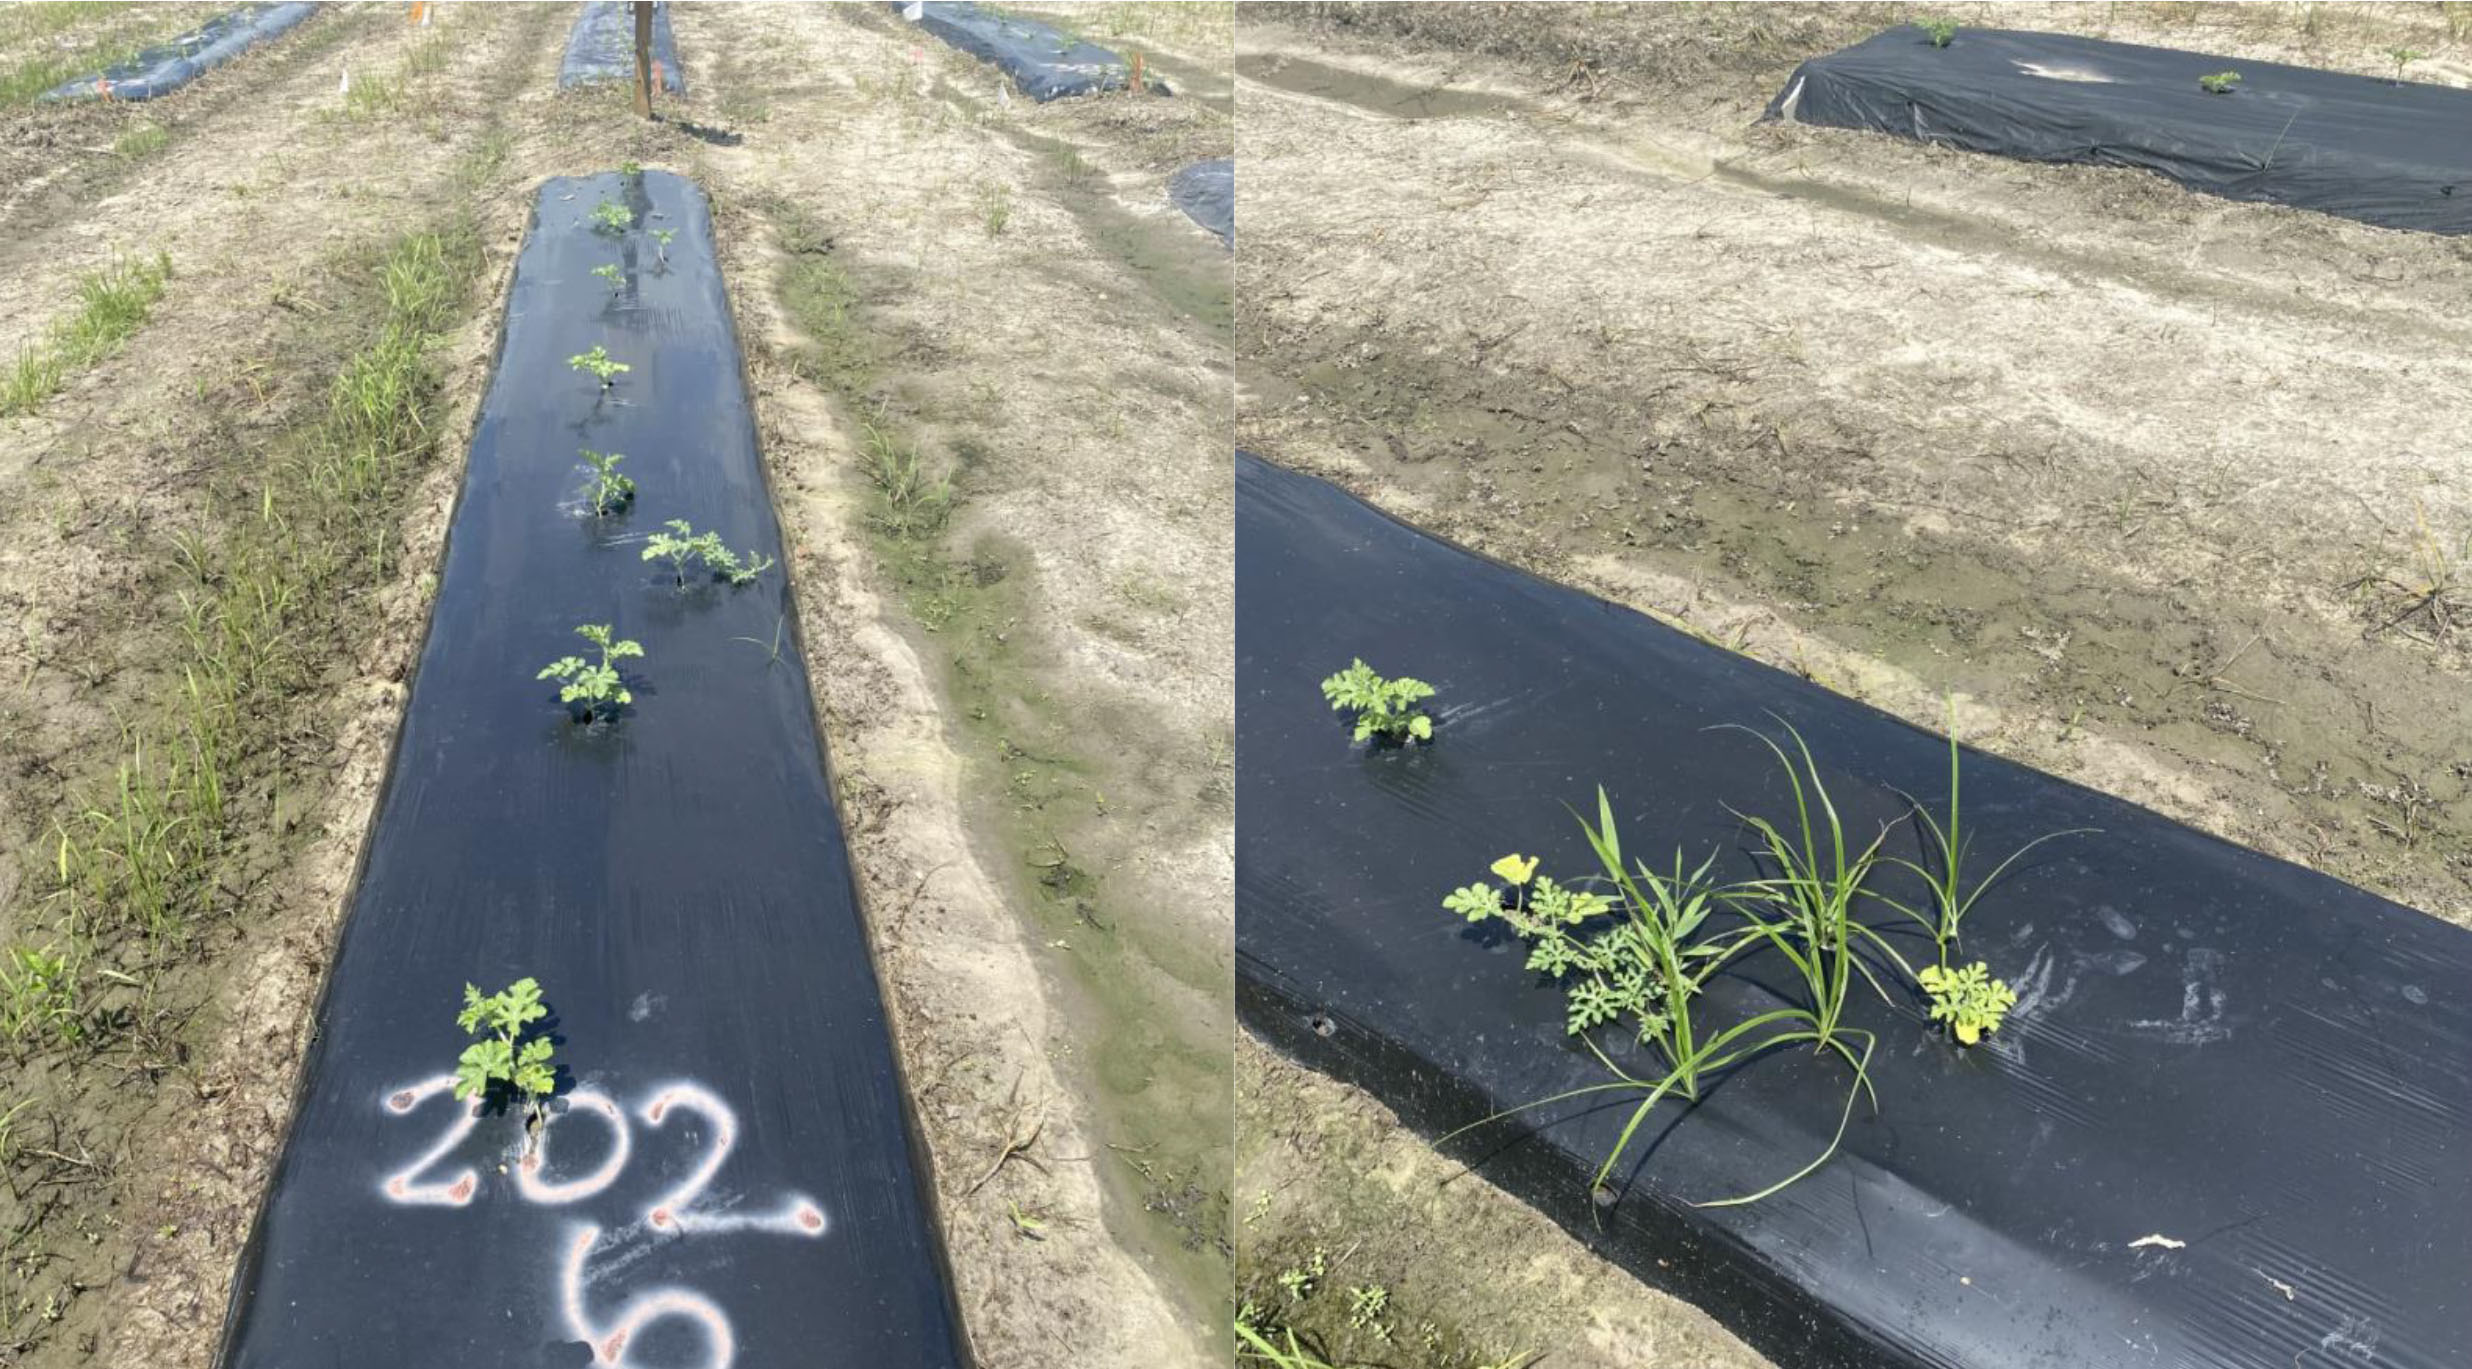 Evenly spaces plants grow out of two rows of dirt covered by a black tarp. The row on the right shows thin weeds growing as well.